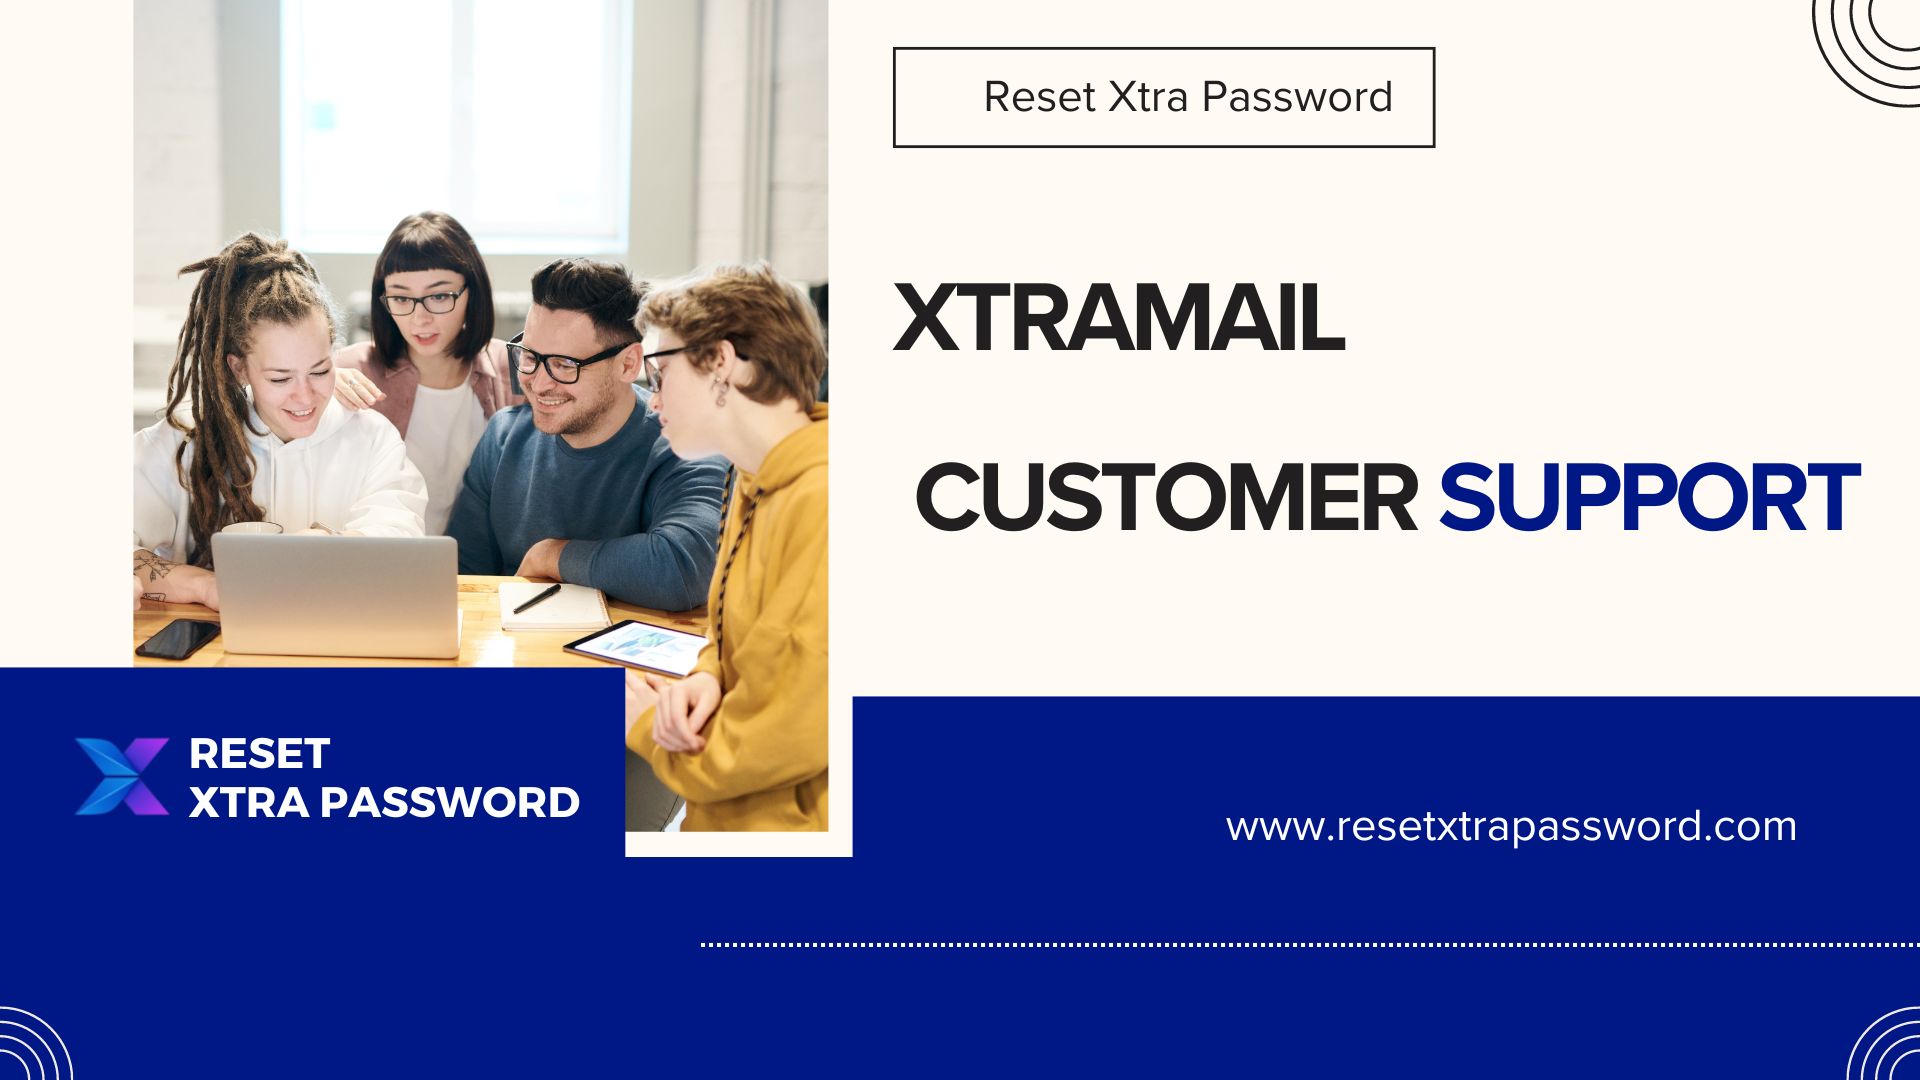 How To Contact Xtramail Customer Support